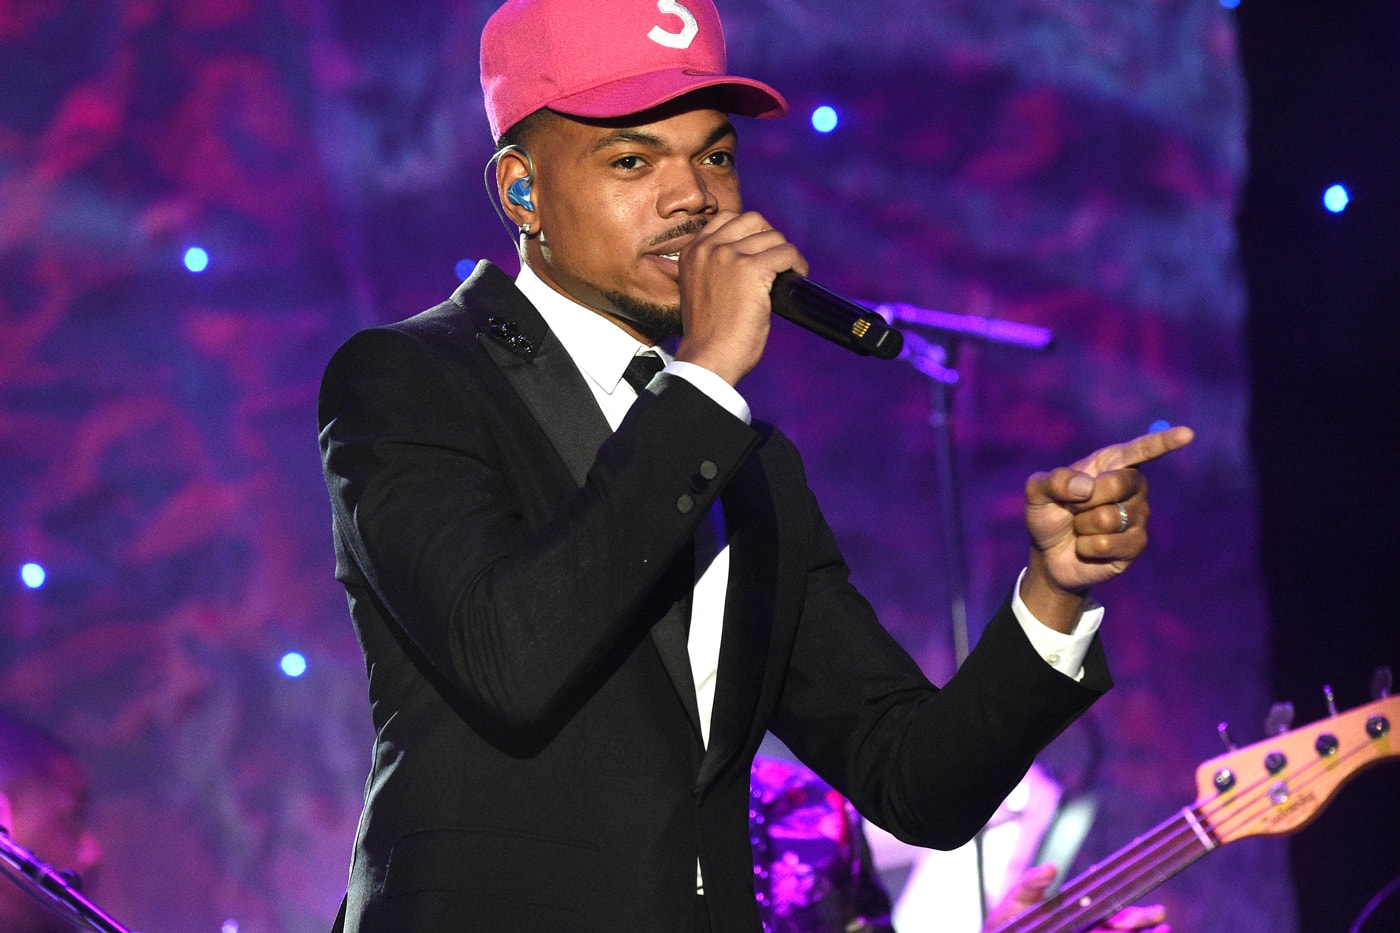 Chance the Rapper, Chuck Inglish & More Featured on Consequence's "Spaceship 3"